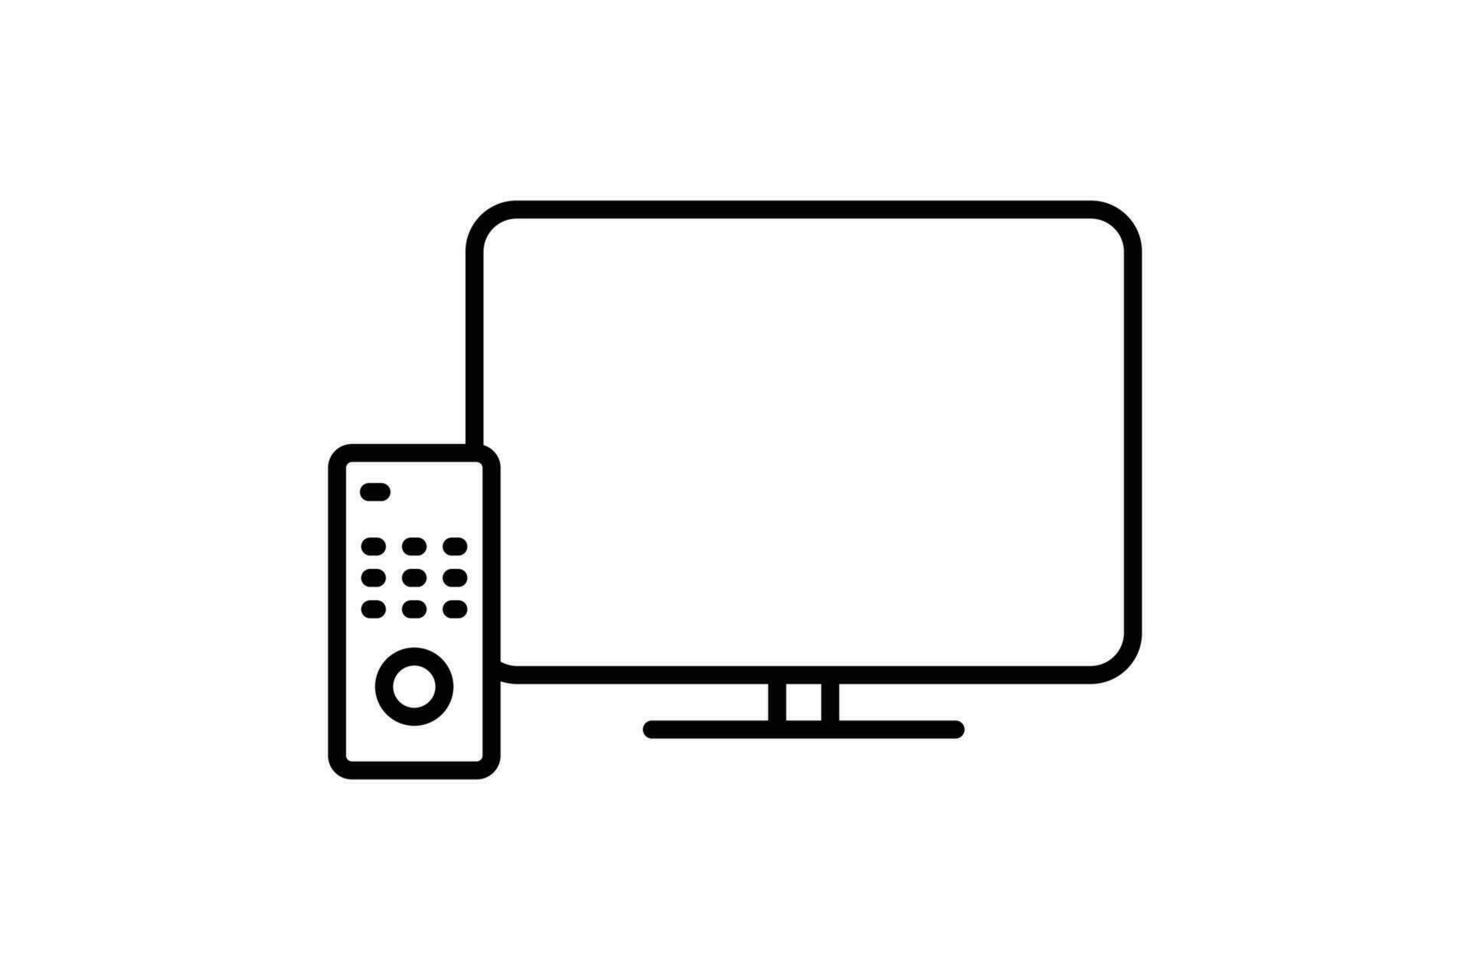 Television icon. icon related to electronic, household appliances. Line icon style design. Simple vector design editable